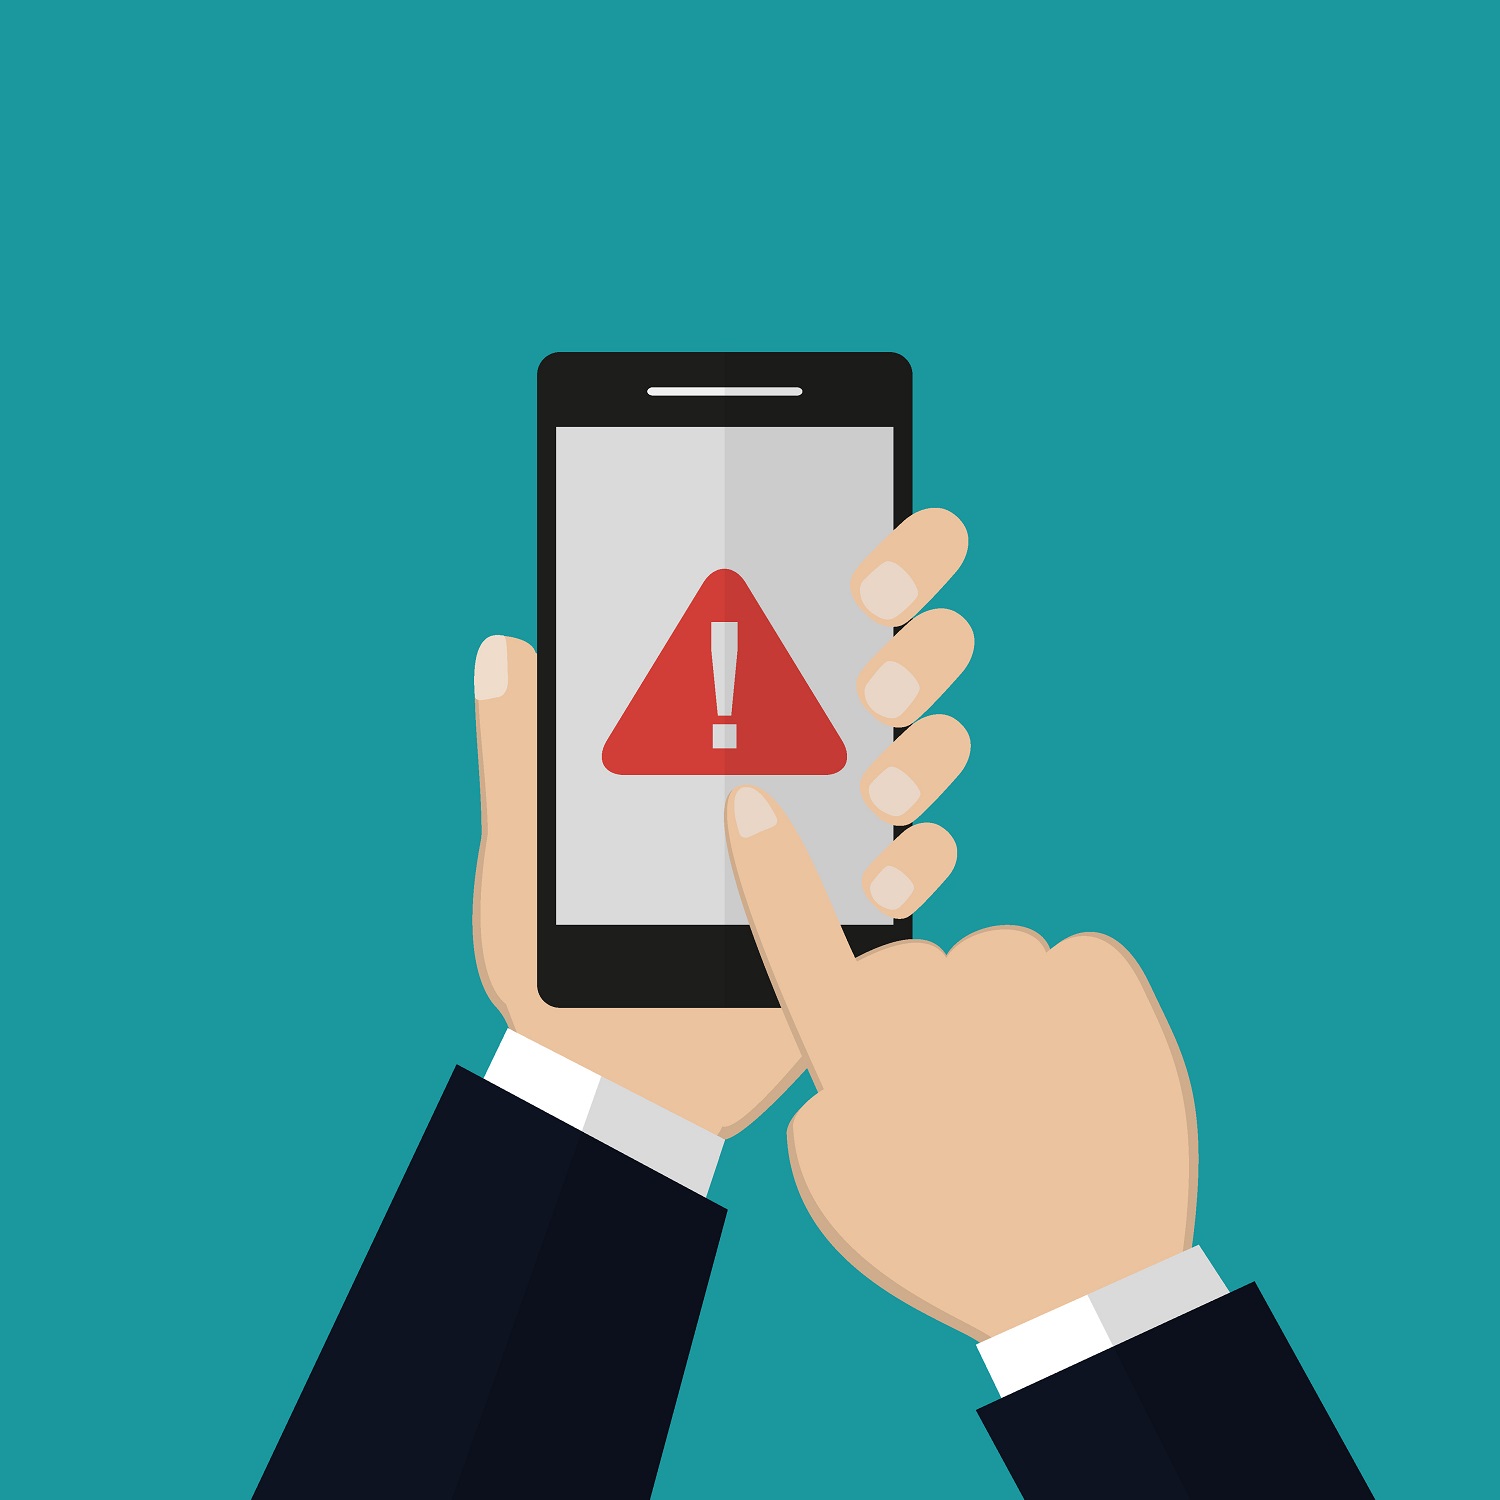 Does my business need an emergency alert system?